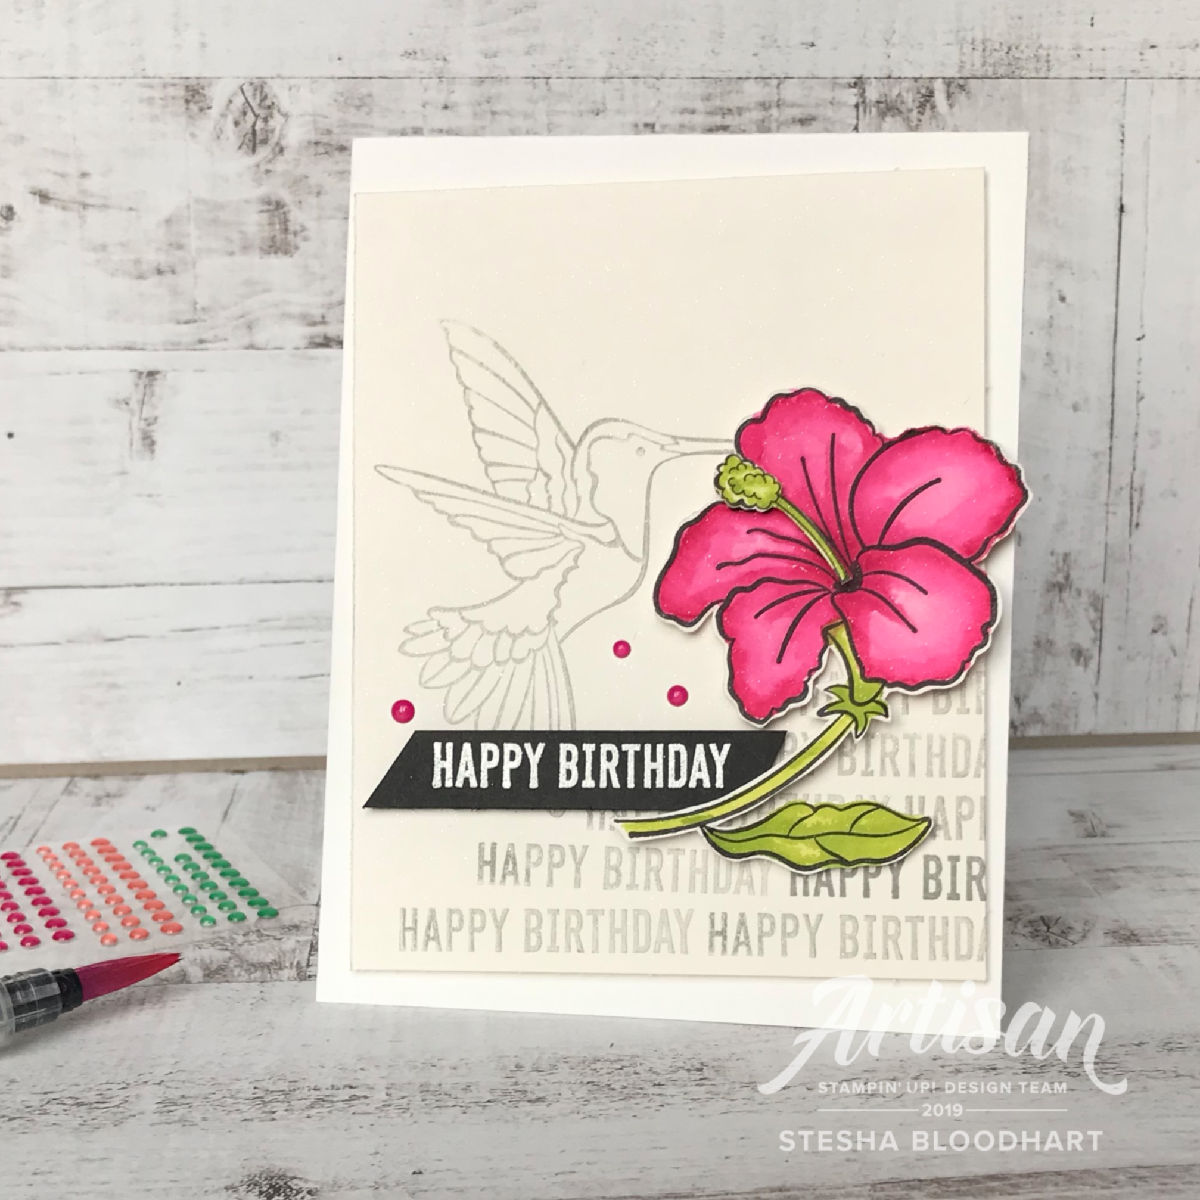 Humming Along and Itty Bitty Birthdays Cling Stamp Sets by Stampin' Up! Card Created by Artisan Stesha Bloodhart, Stampin' Hoot! for the #tgifc193 Color Challenge